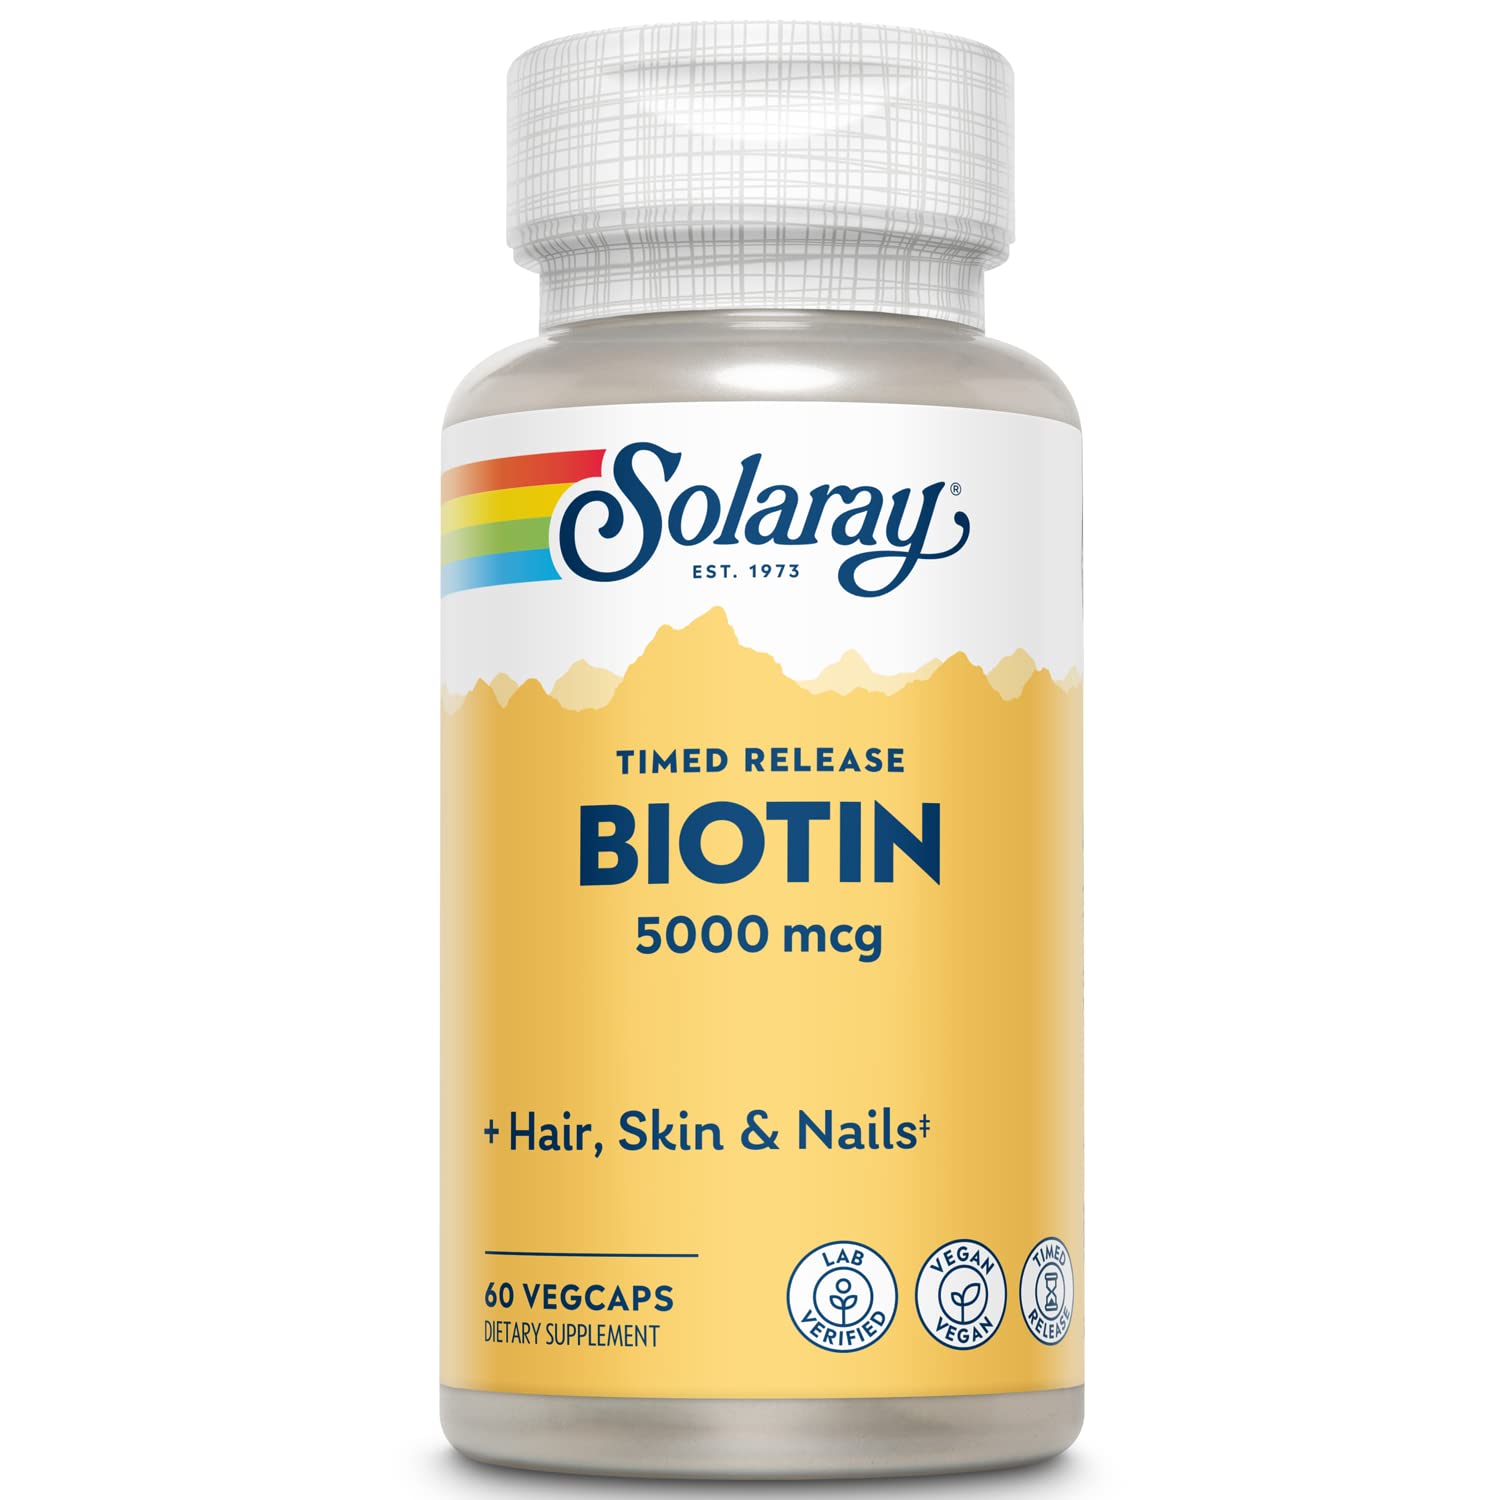 Solaray Biotin Two Stage Time Released Supplement, 5000 mcg, 60 Count